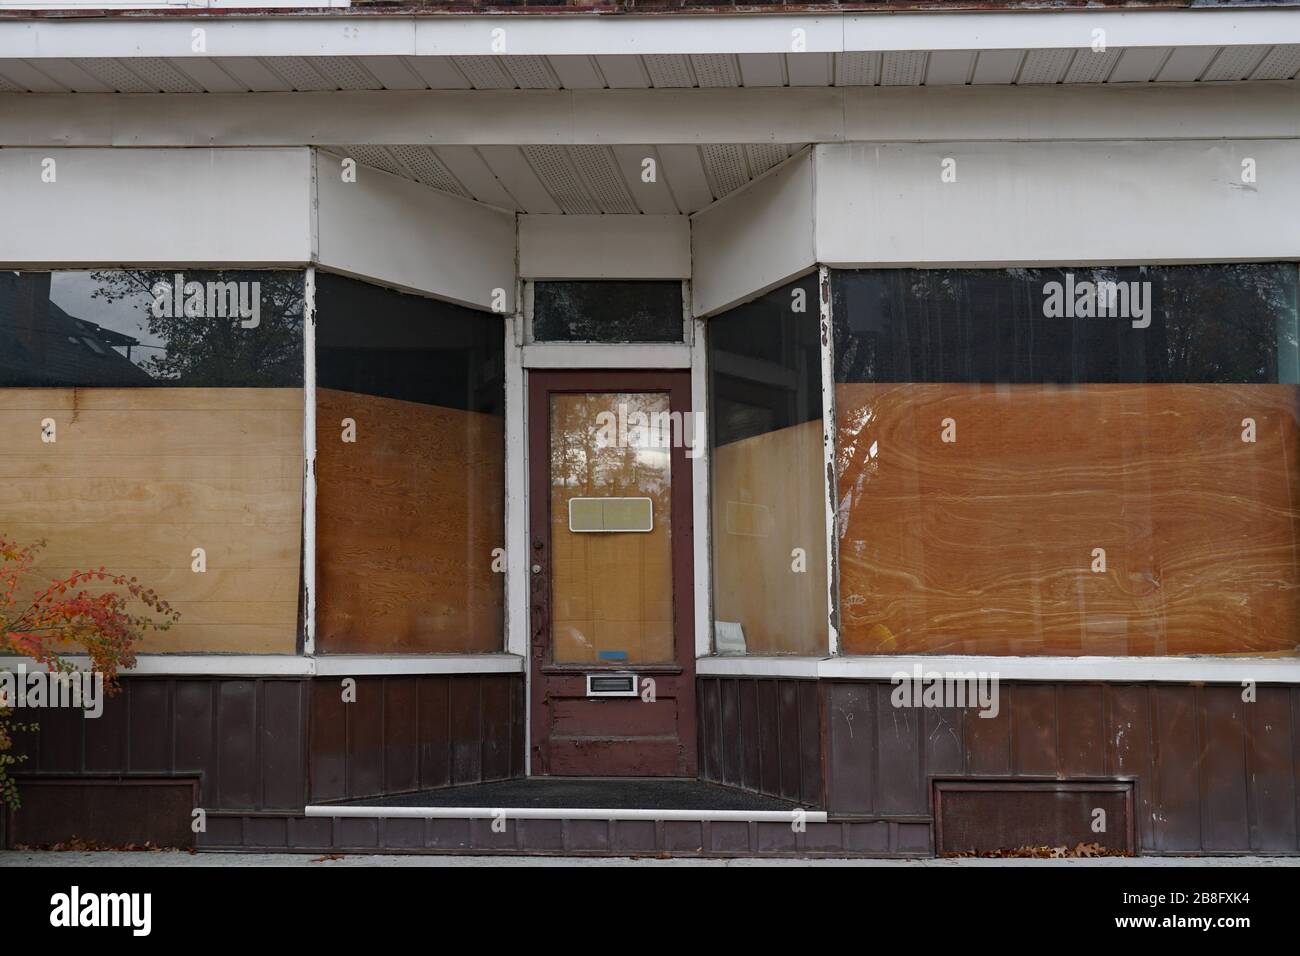 Derelict storefront with boarded up windows Stock Photo